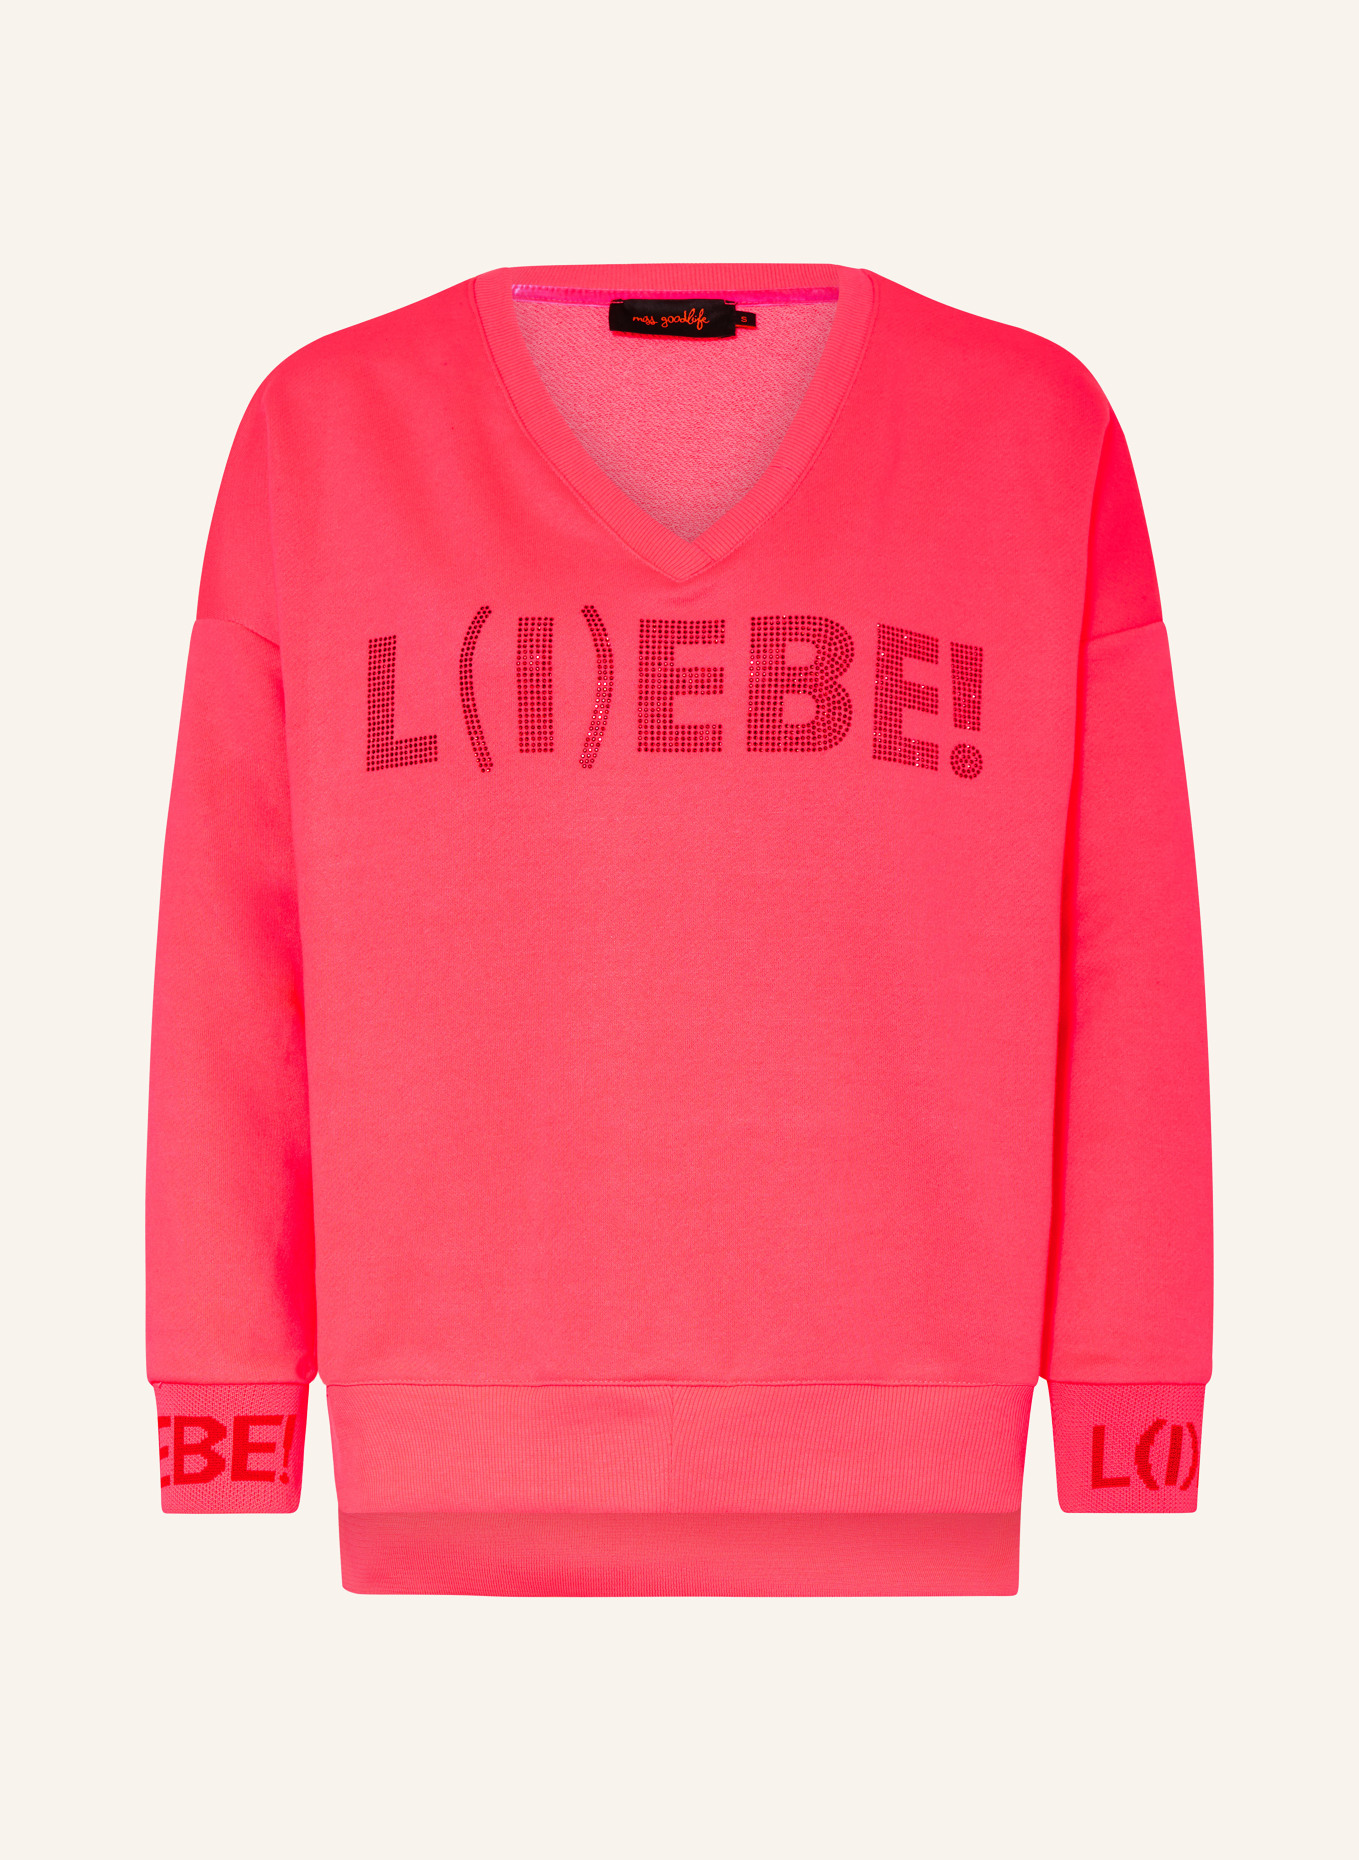 miss goodlife Sweatshirt with decorative gems, Color: NEON PINK (Image 1)